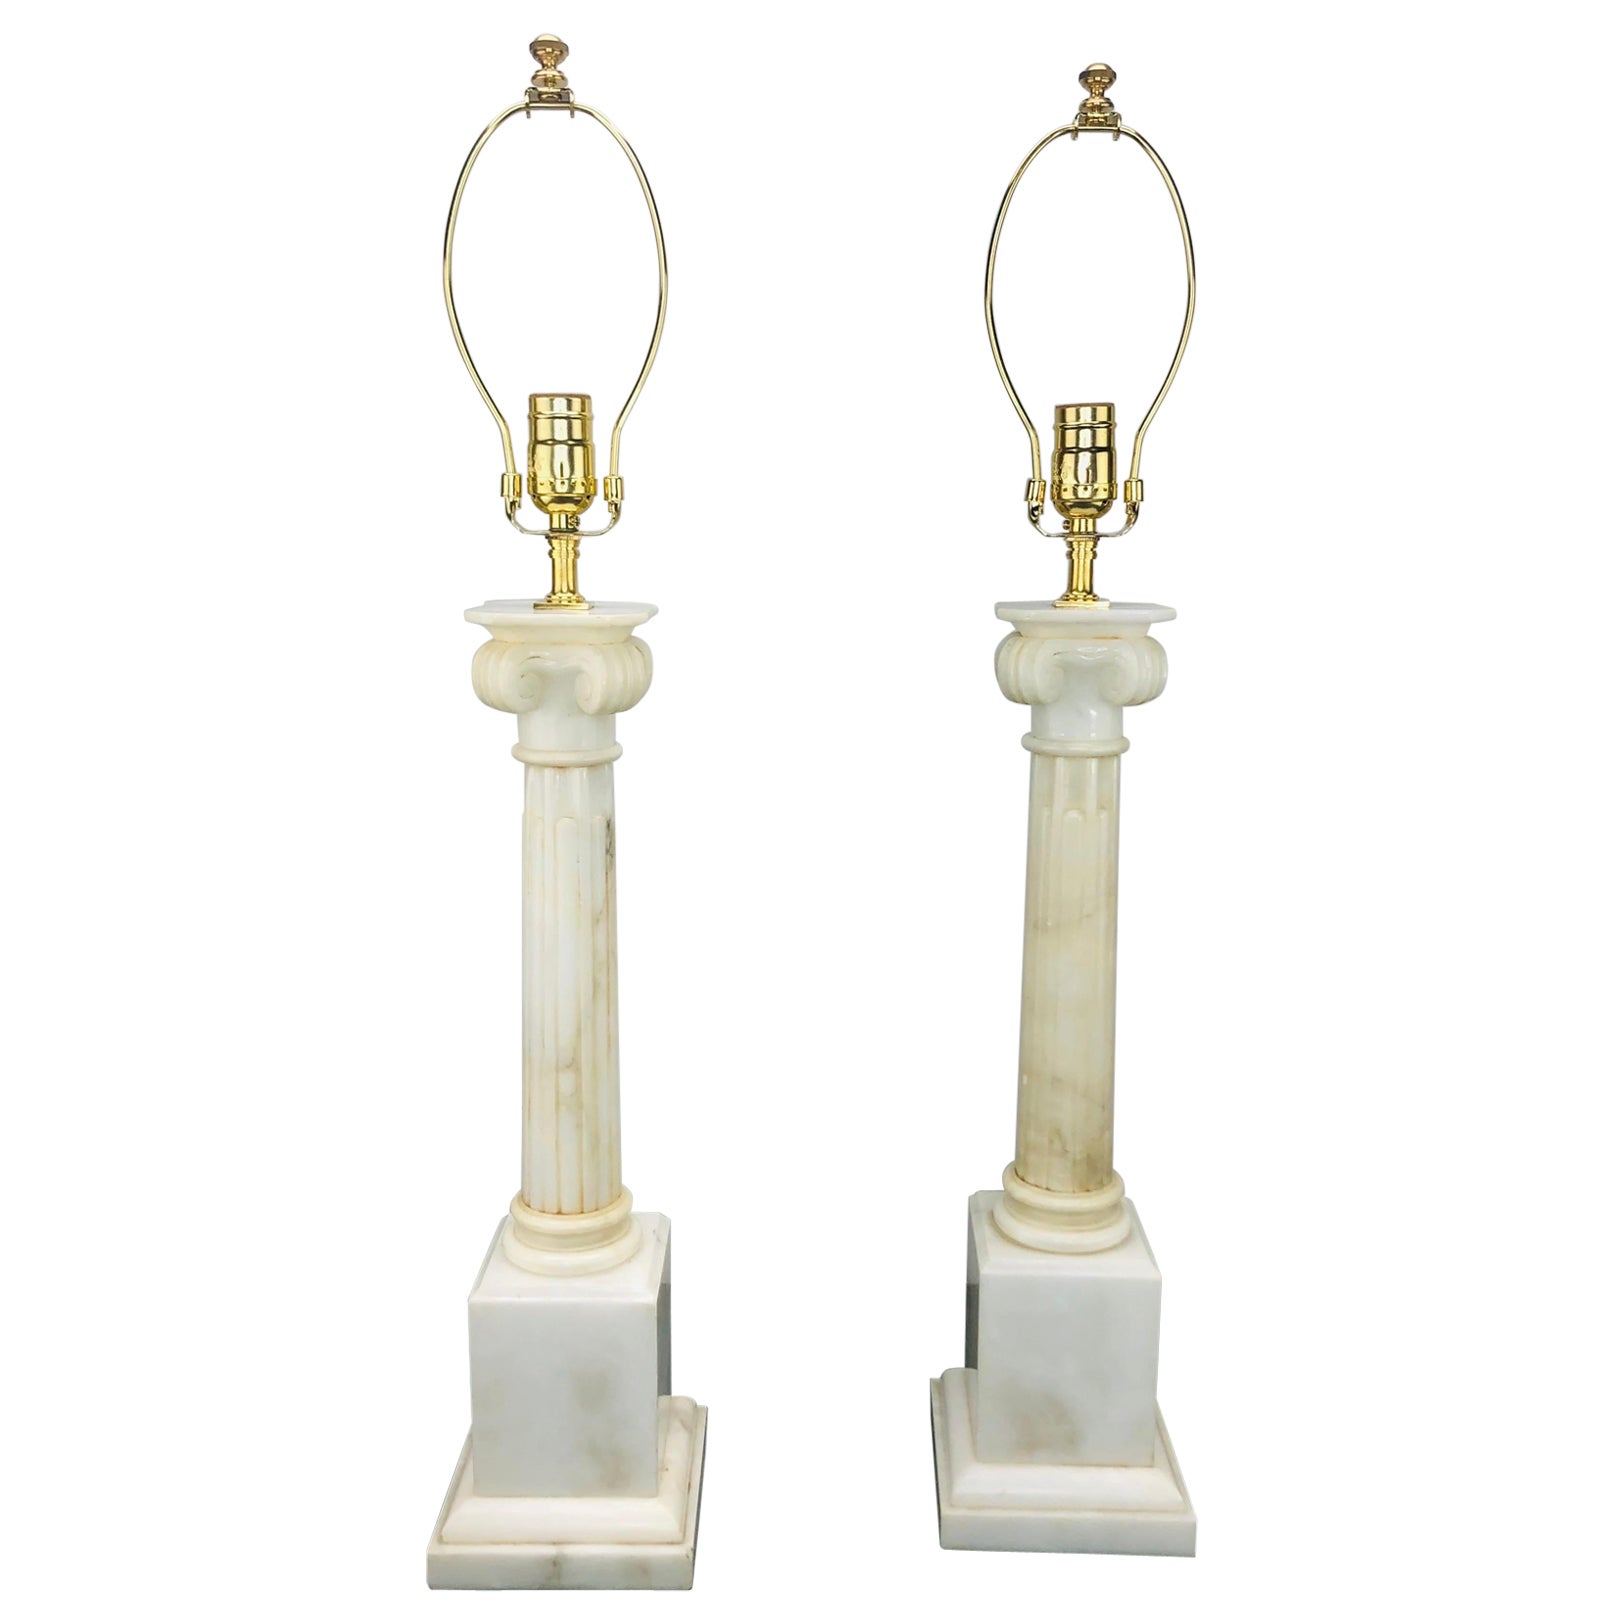 Pair of Large Vintage Italian Alabaster Column Lamps with Ionic Capitals